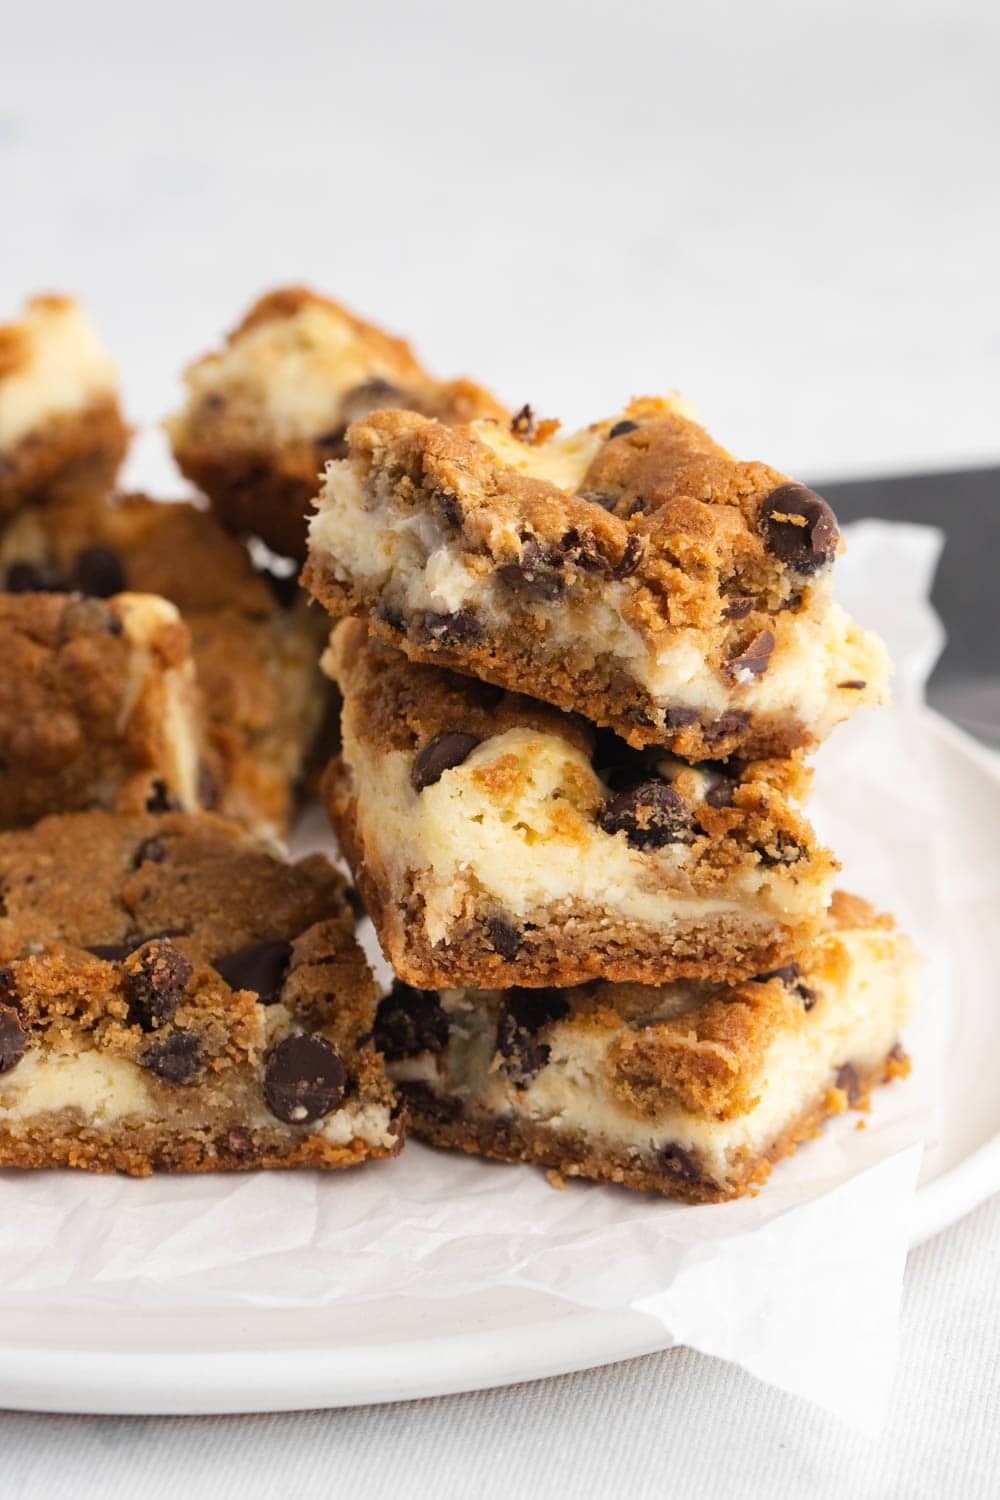 Chocolate Chip Cheesecake Bars Stacked on a White Plate With Parchment Paper